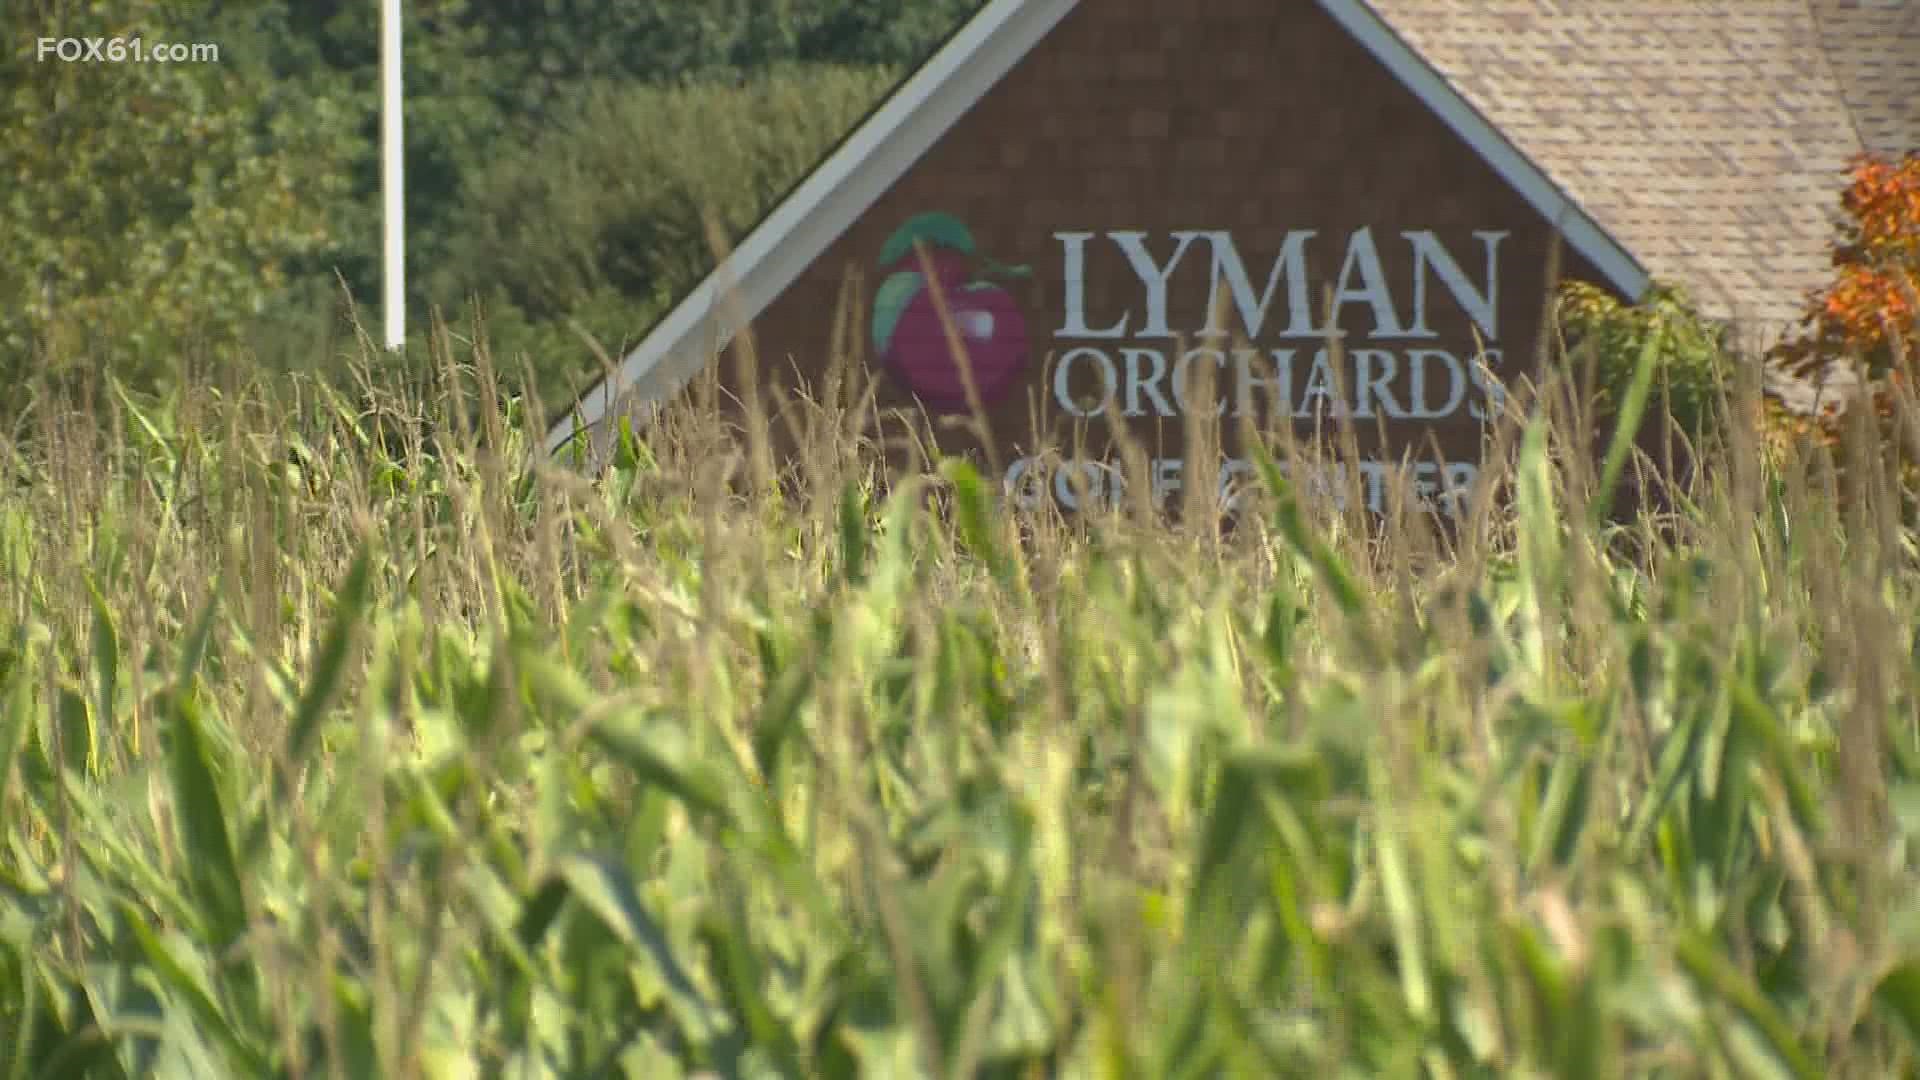 Now in it’s 22nd year, the Lyman Orchard’s Corn Maze is open again on four acres in Middlefield.